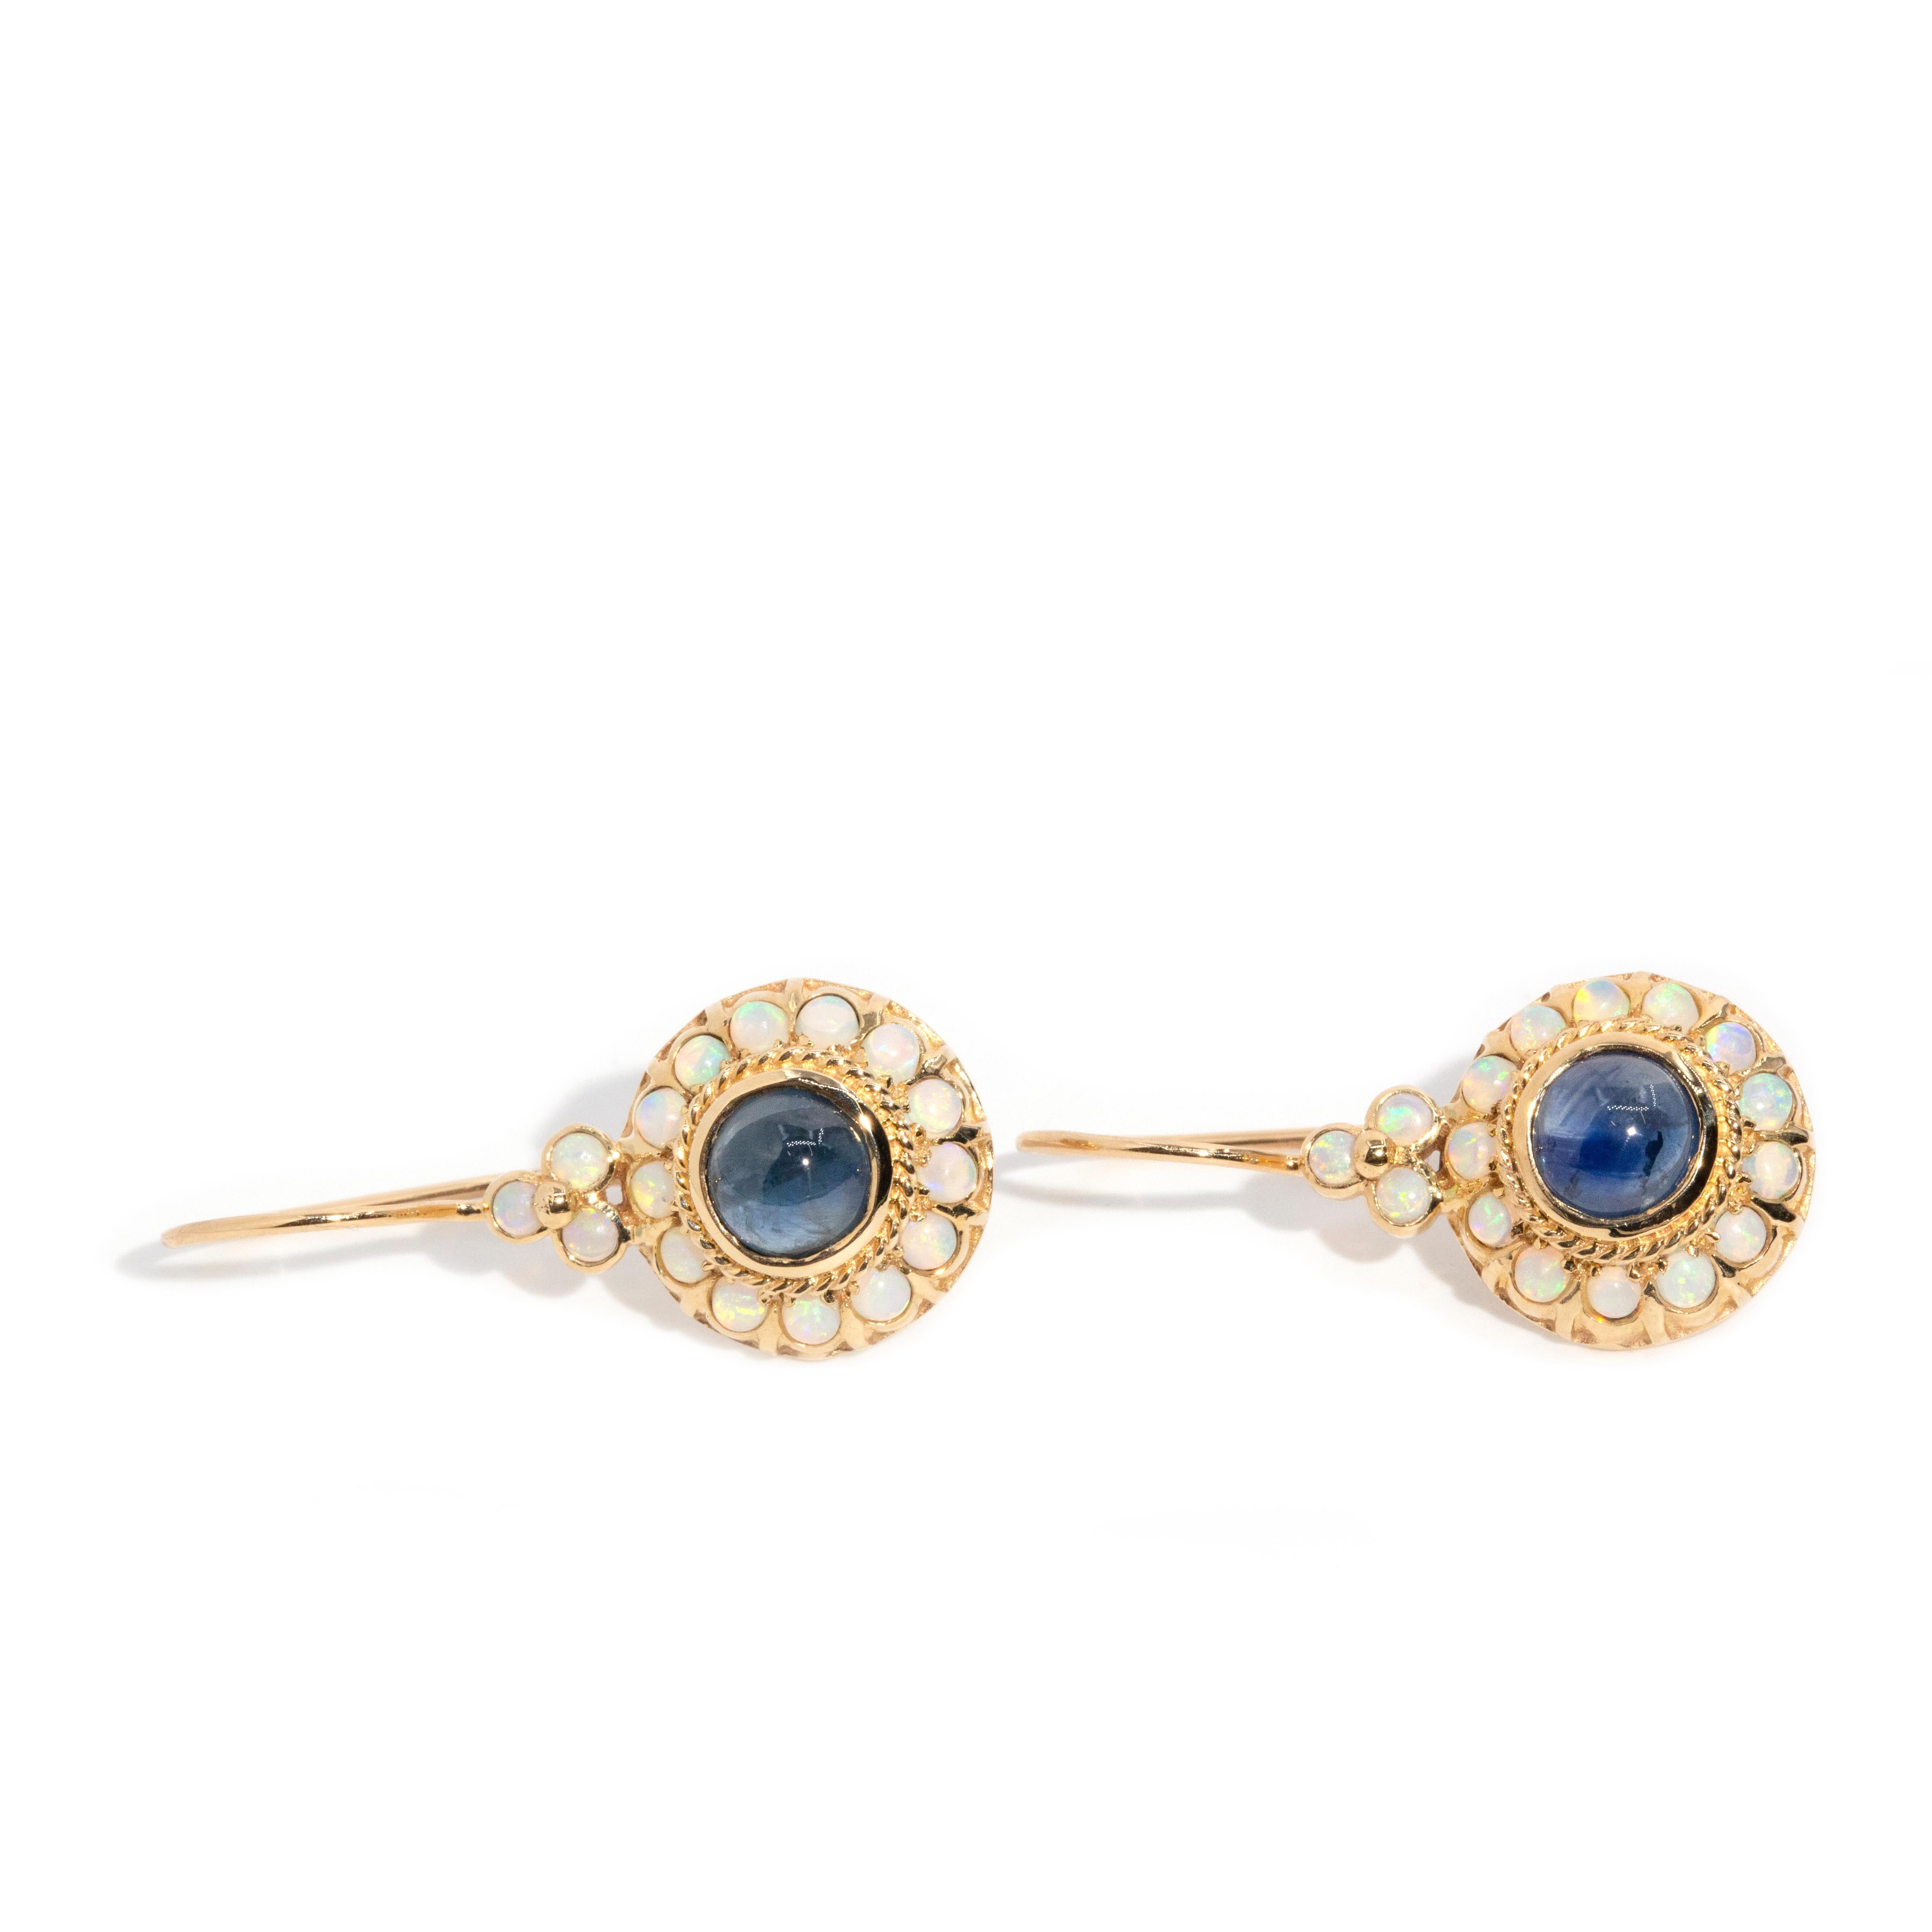 Round Cut Vintage Inspired Sapphire Cabochon & Opal Drop Earrings 9 Carat Yellow Gold